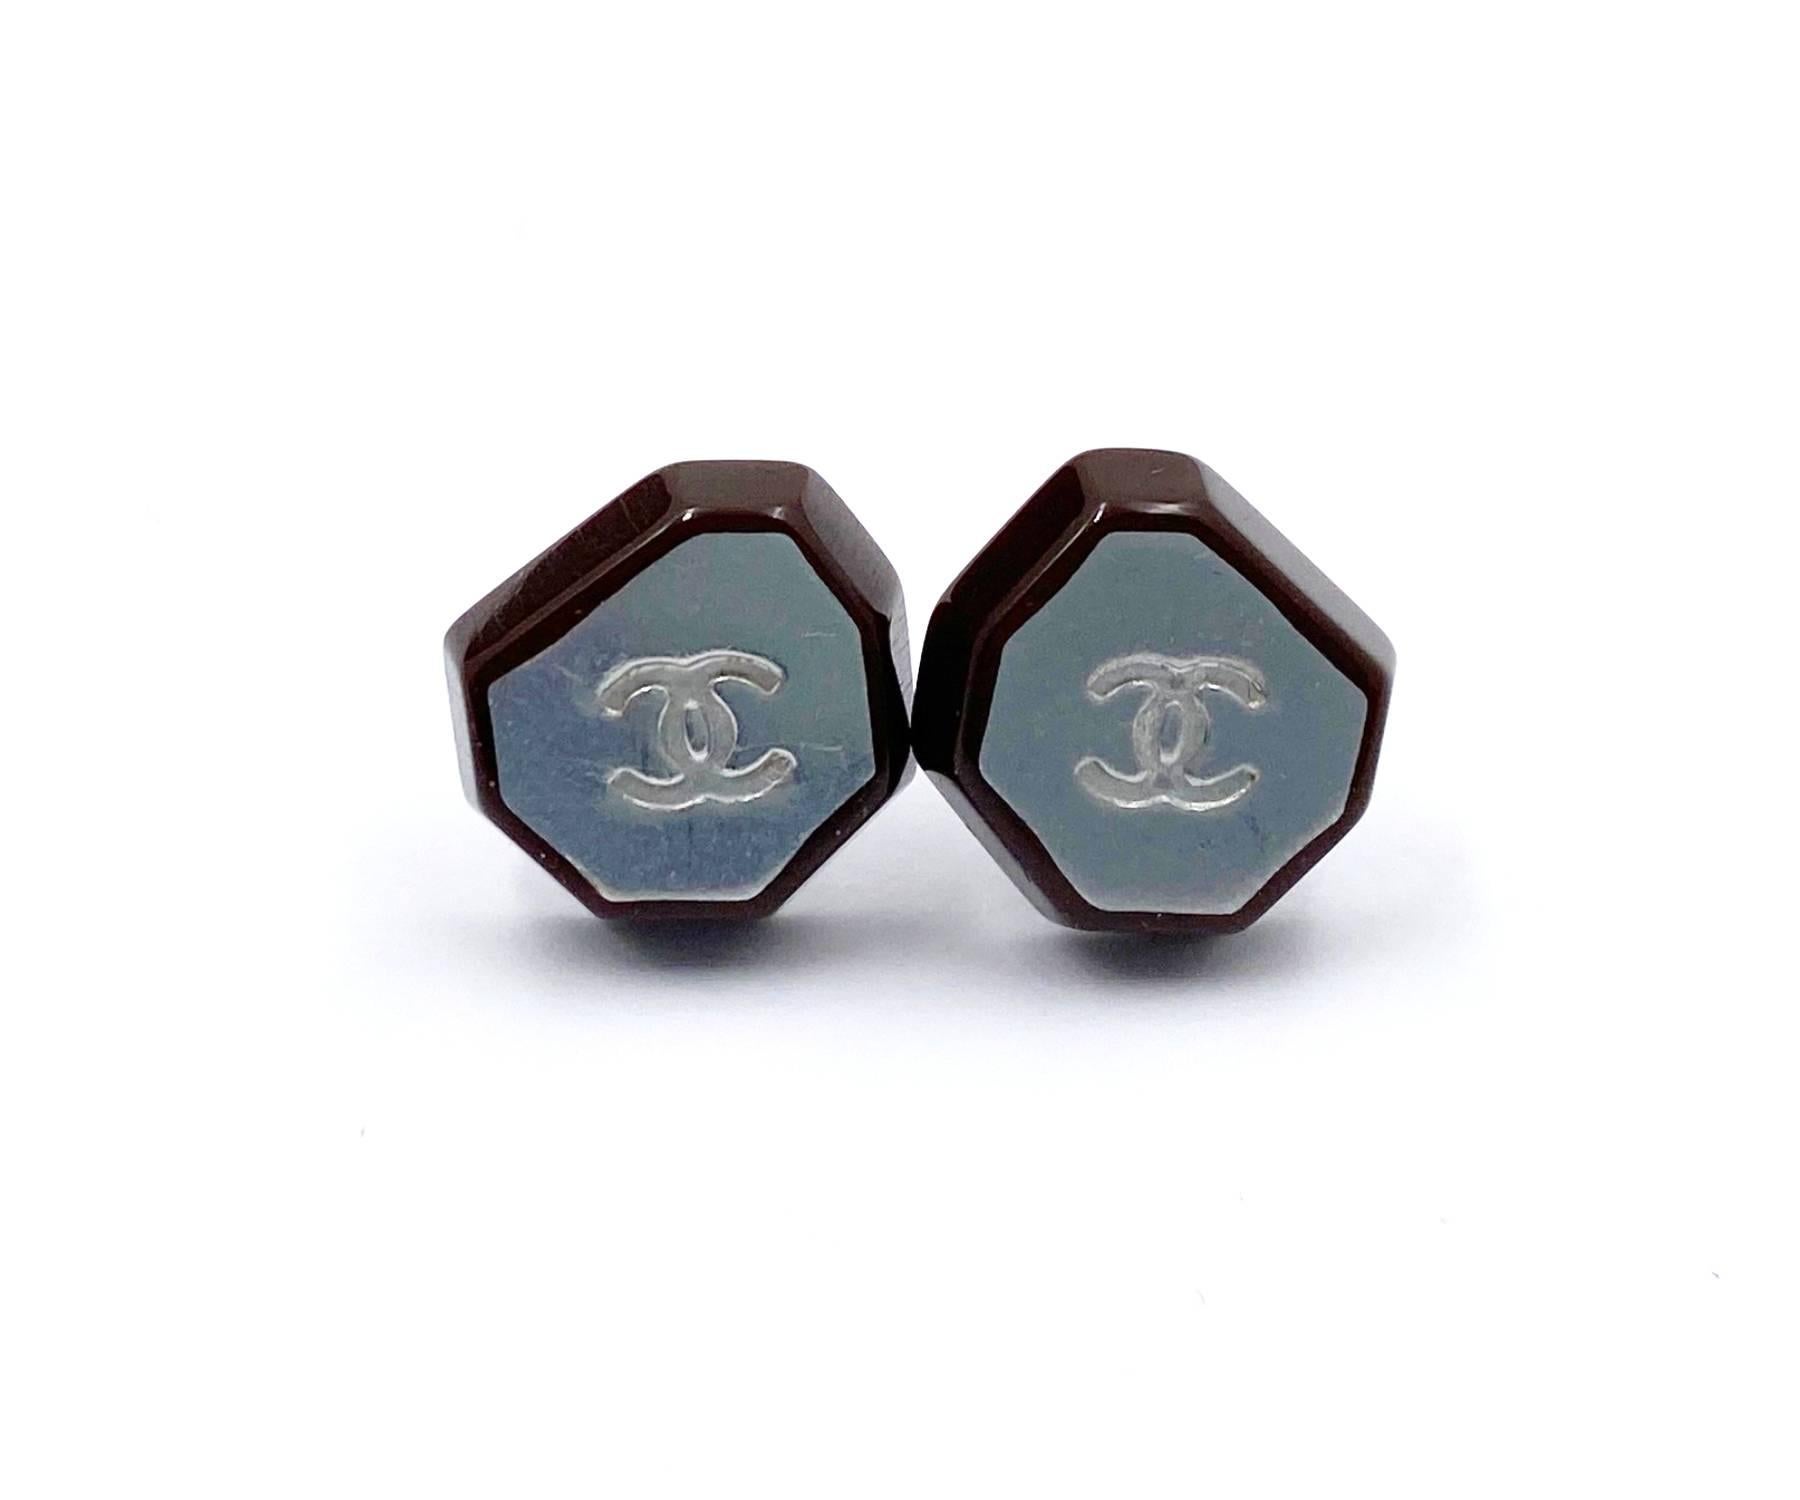 Chanel Burgundy Silver CC Piercing Earrings

*Marked 99 (Missing one hallmark)
*Made in France

-Approximately 0.5″ x 0.5″
-Very classic and pretty
-In a good condition. It shows normal signs of wear.

AB1989-00094